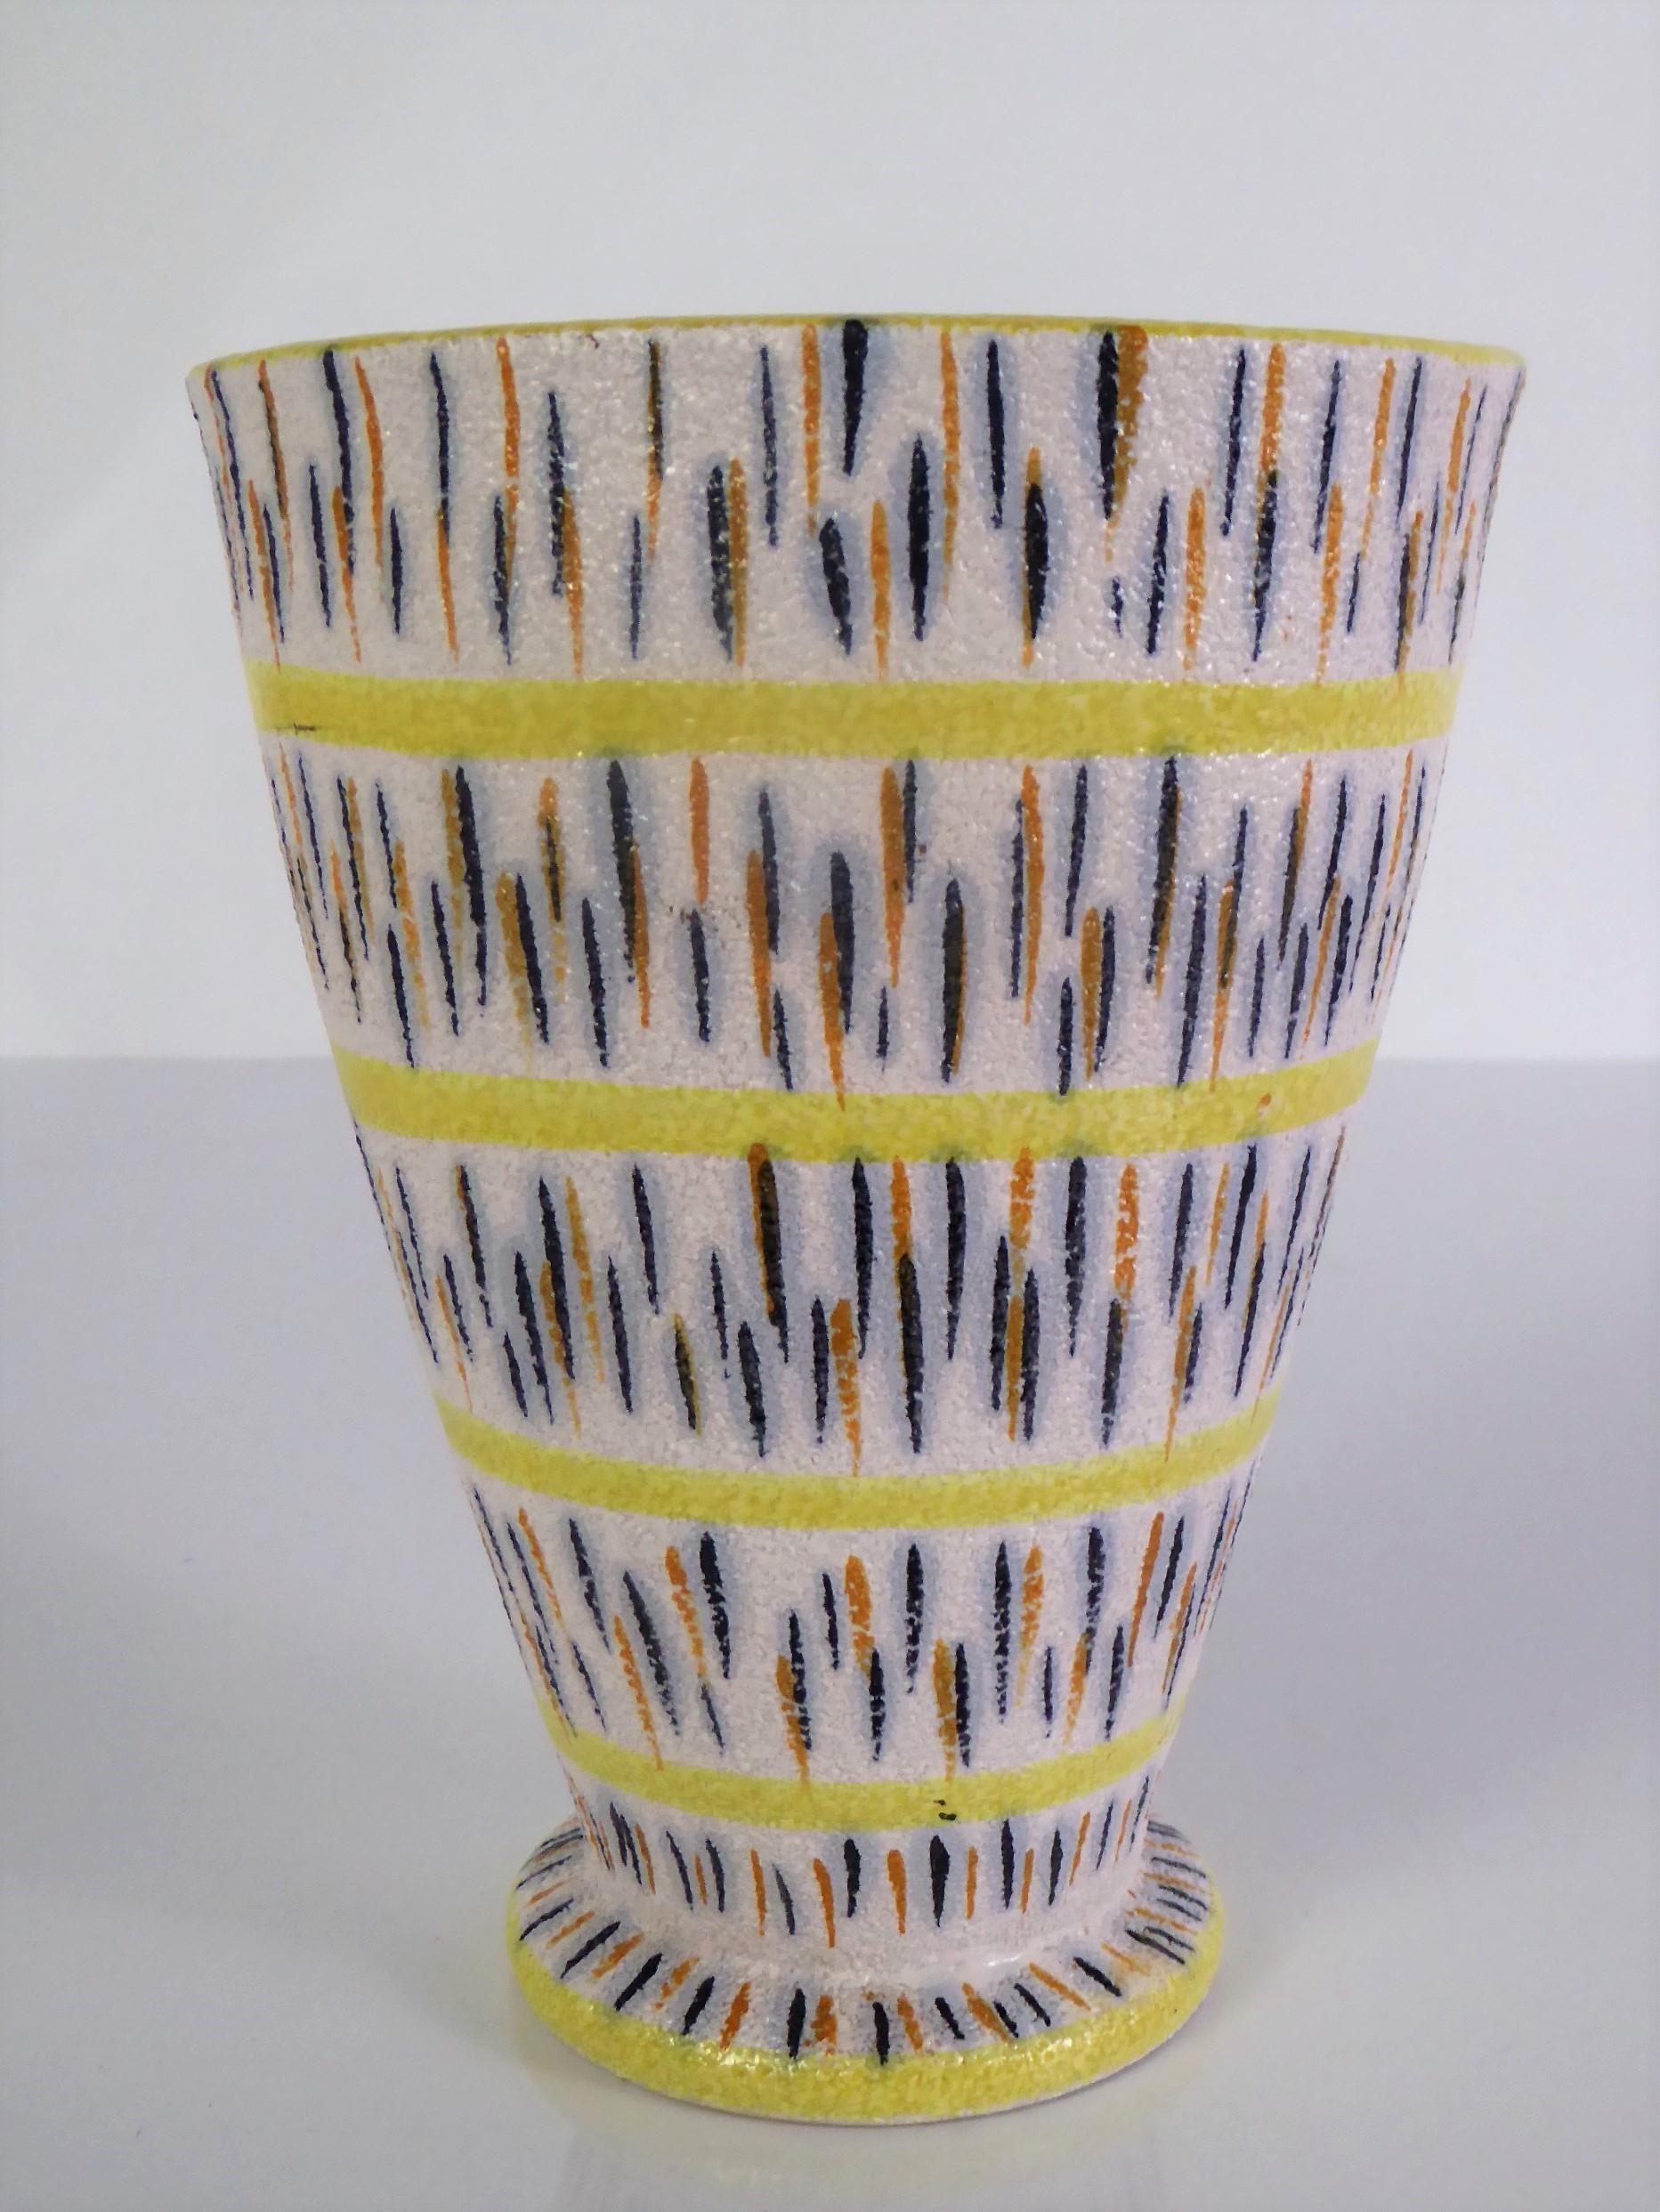 Lovely and cheerful Italian Modern pottery vase from the 1960s attributed to the master ceramicist Aldo Londi for the Bitossi company of Montelupo Italy.
Very Good condition, no issues.
Stamped on bottom 5993 ITALY
Measurements: 4 1/4 deep x 5